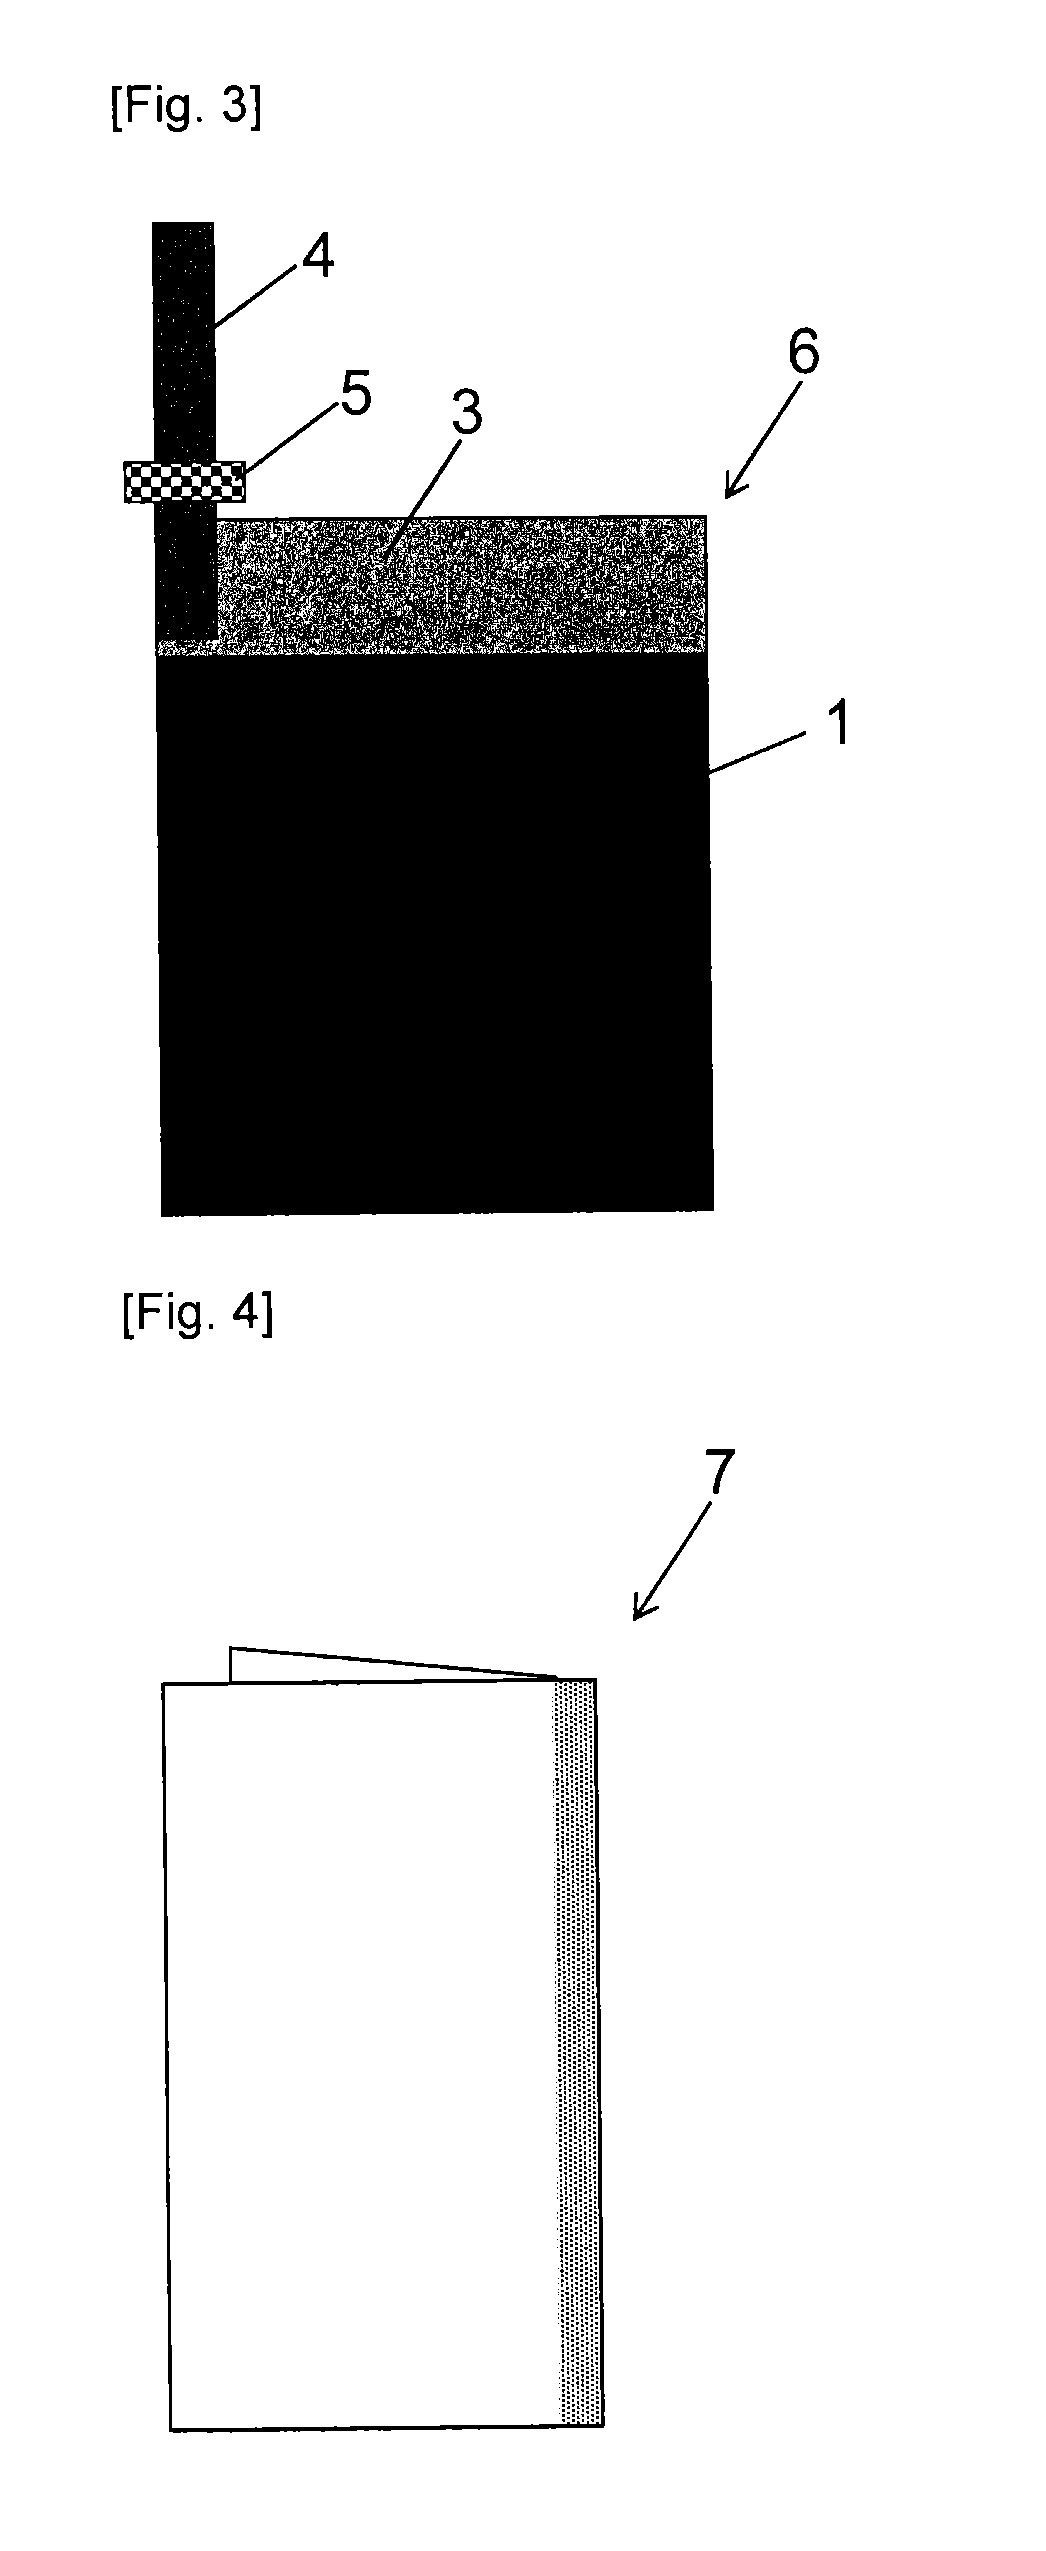 Carbon material for polarizable electrodes and method for producing same